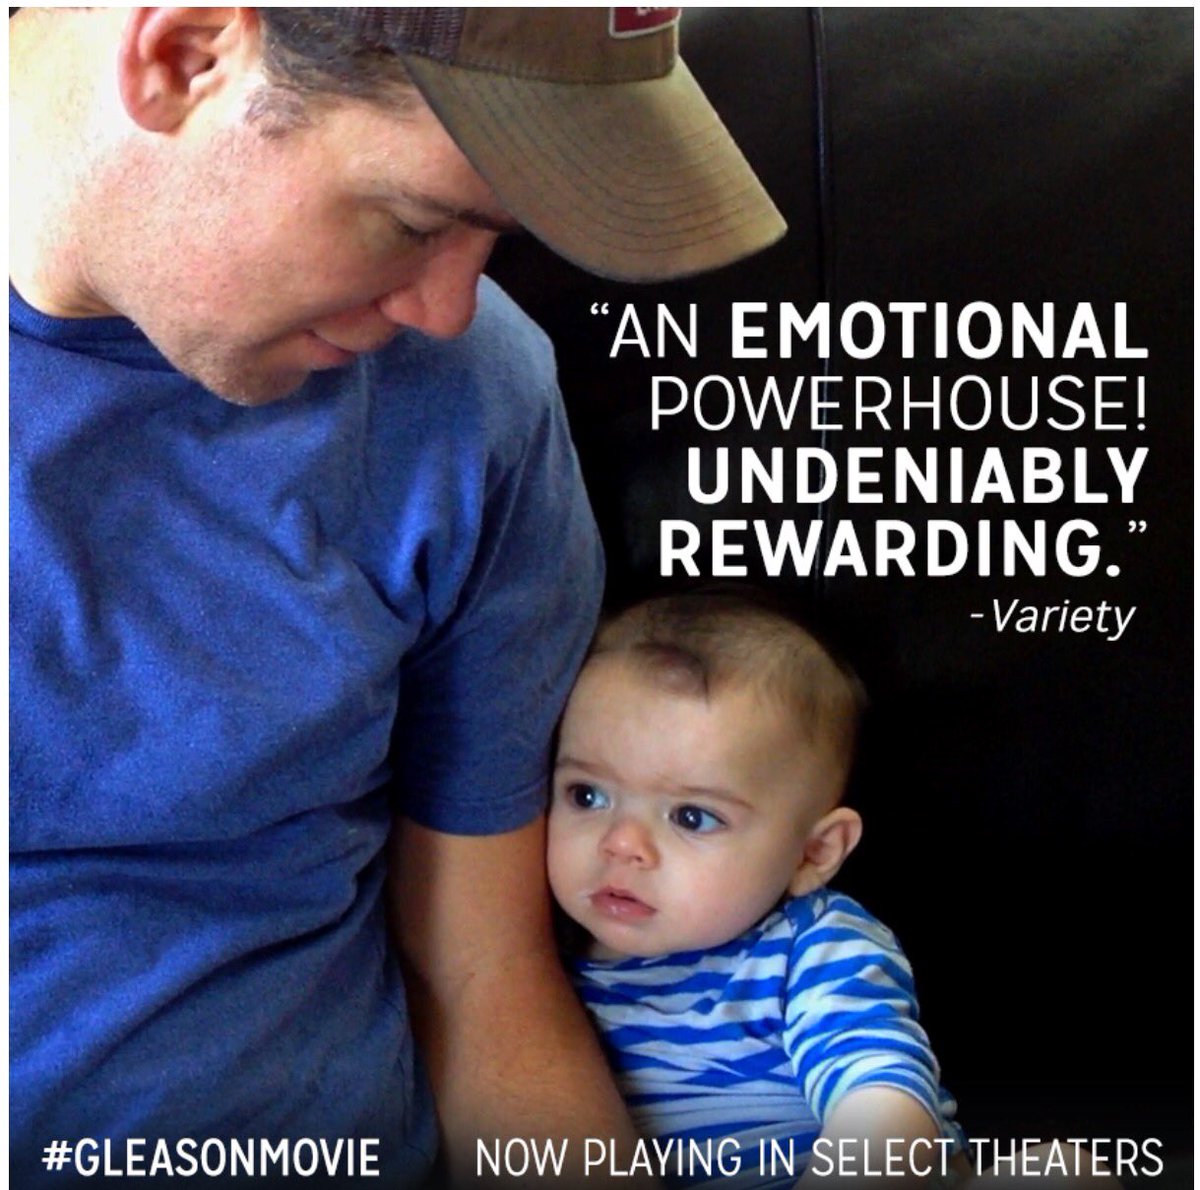 Steve Gleason is a true inspiration. #GleasonMovie in select theaters now, nationwide 8/12. https://t.co/byiw1NPOz3 https://t.co/sTOfOt1a8f